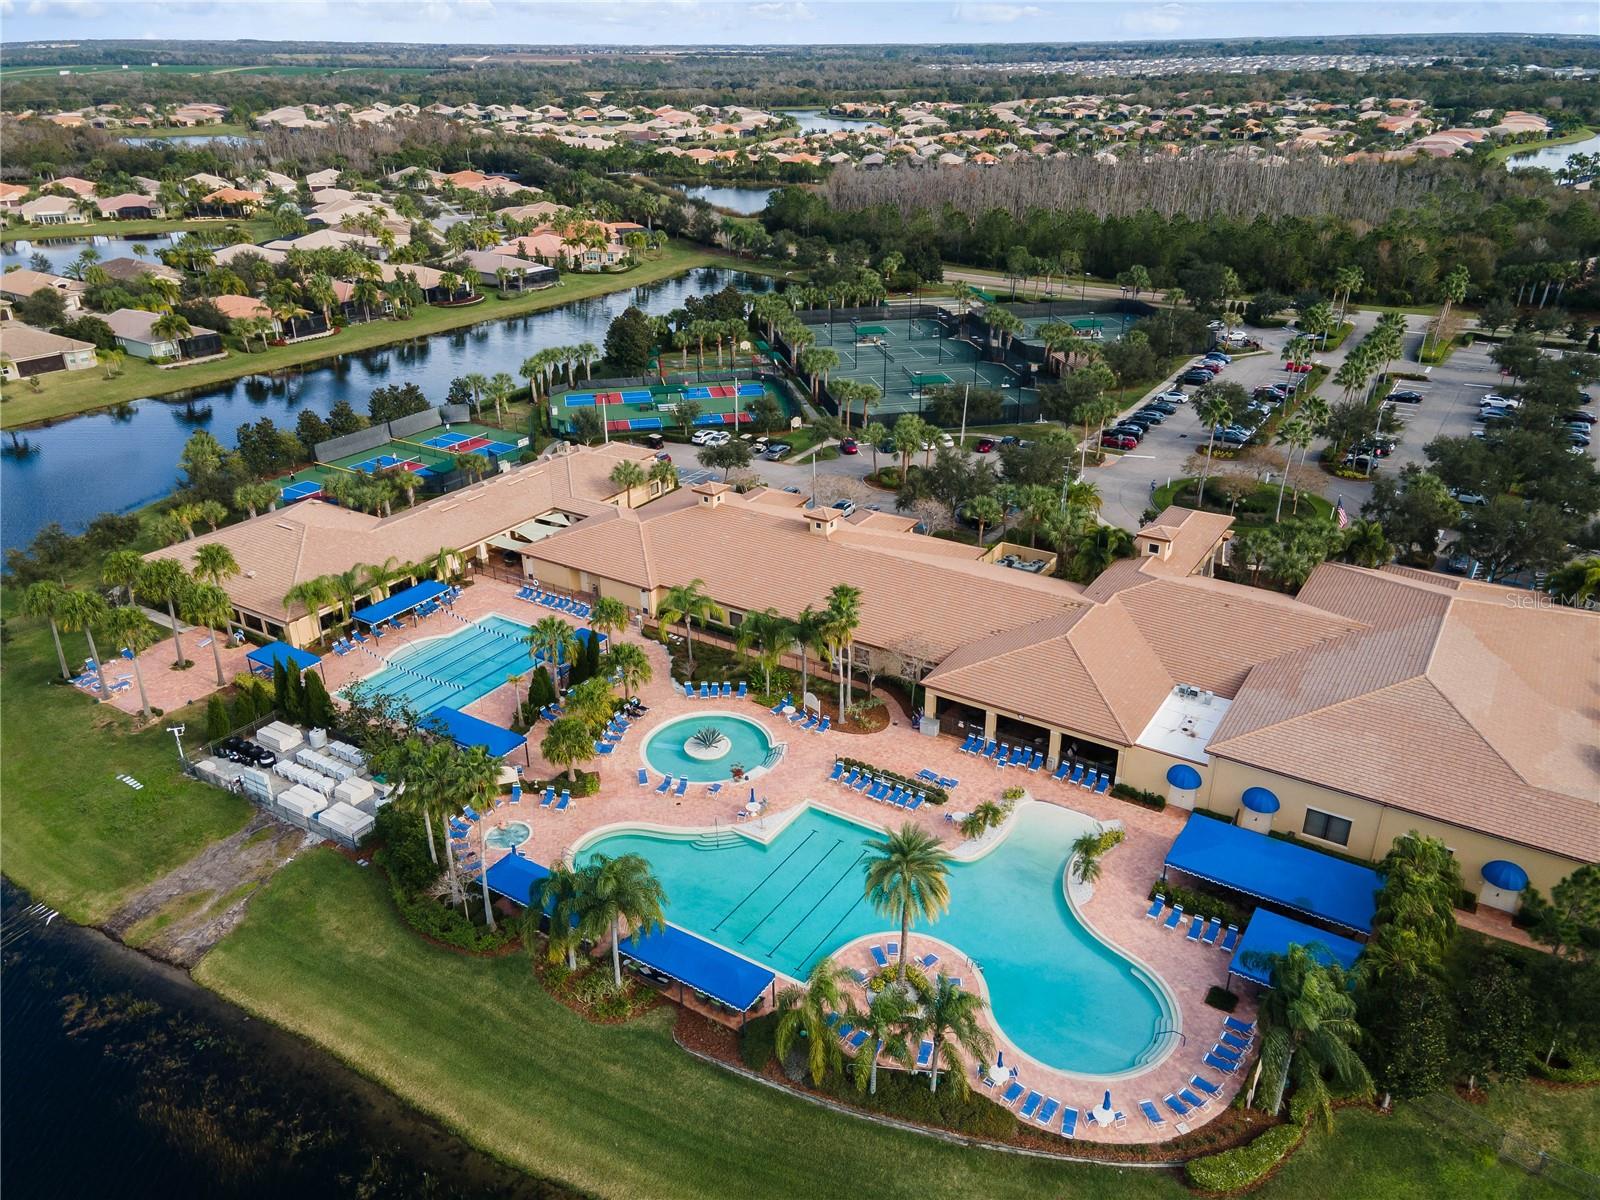 Aerial view of the pools & massive clubhouse